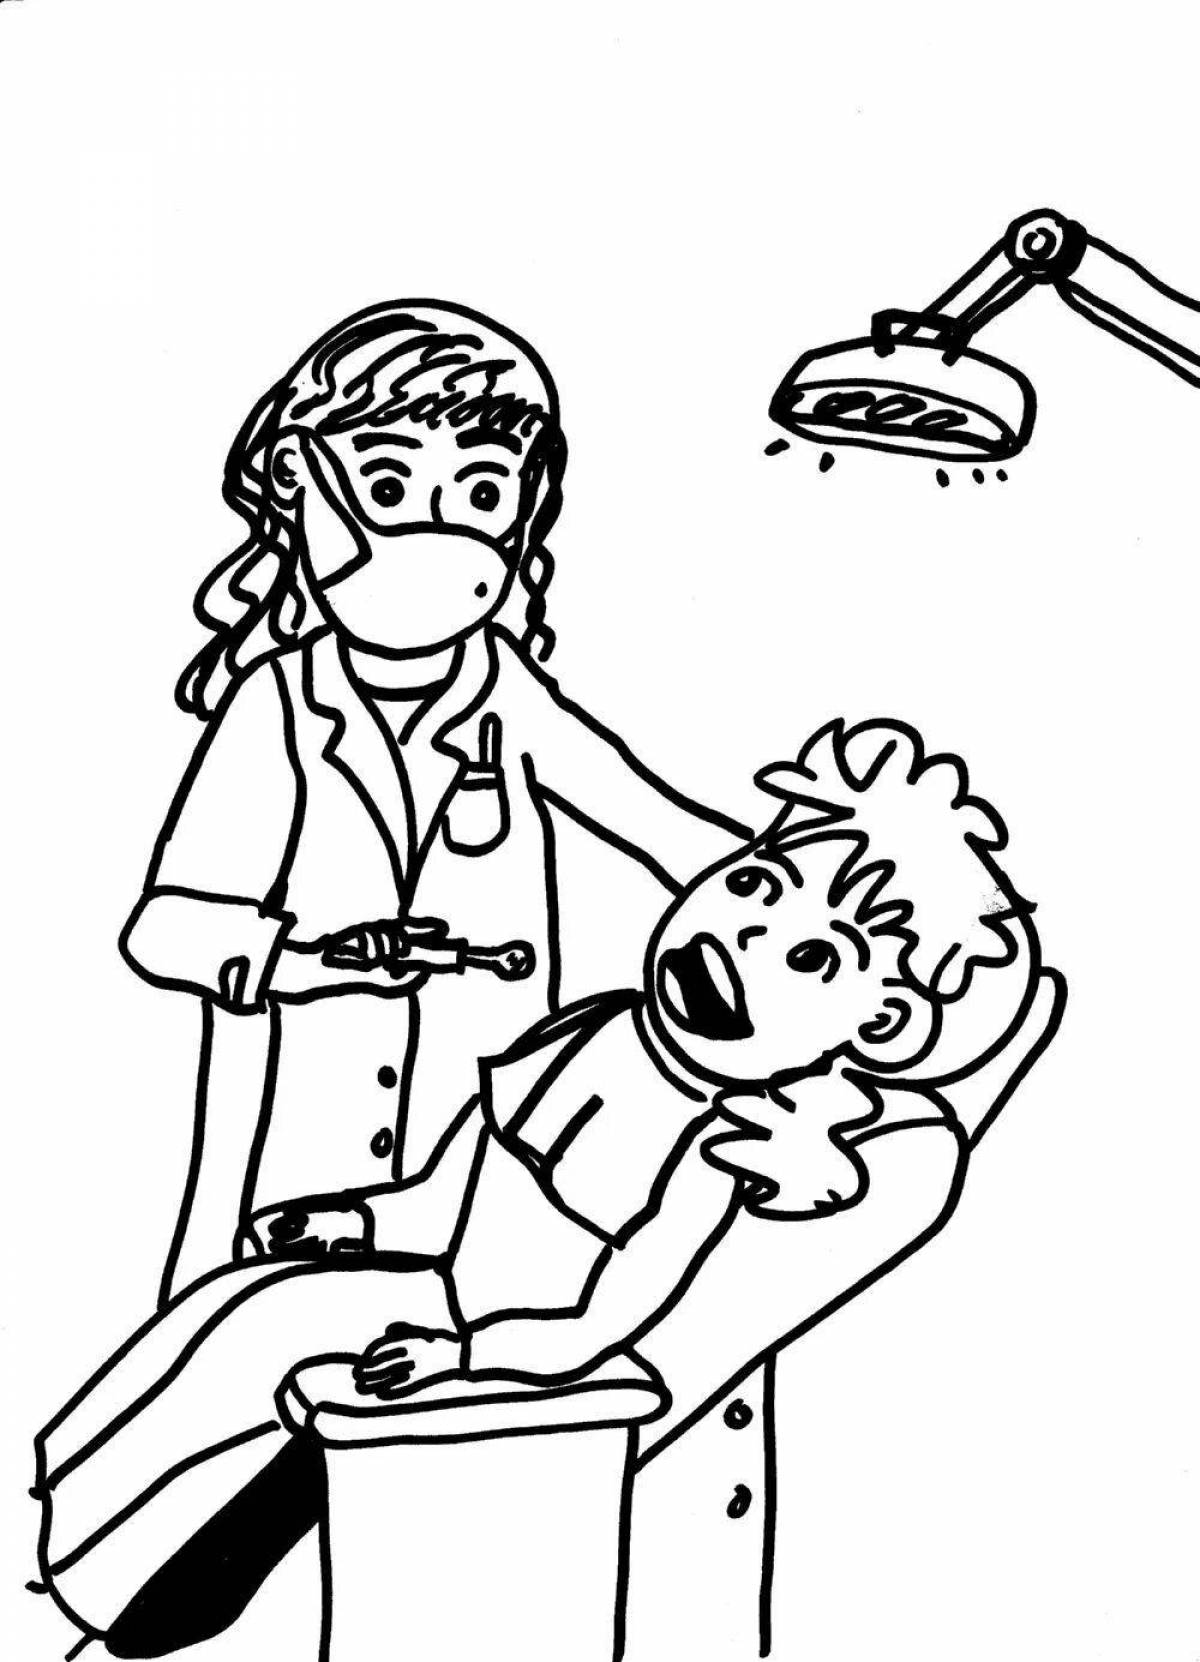 Crazy dentist coloring page